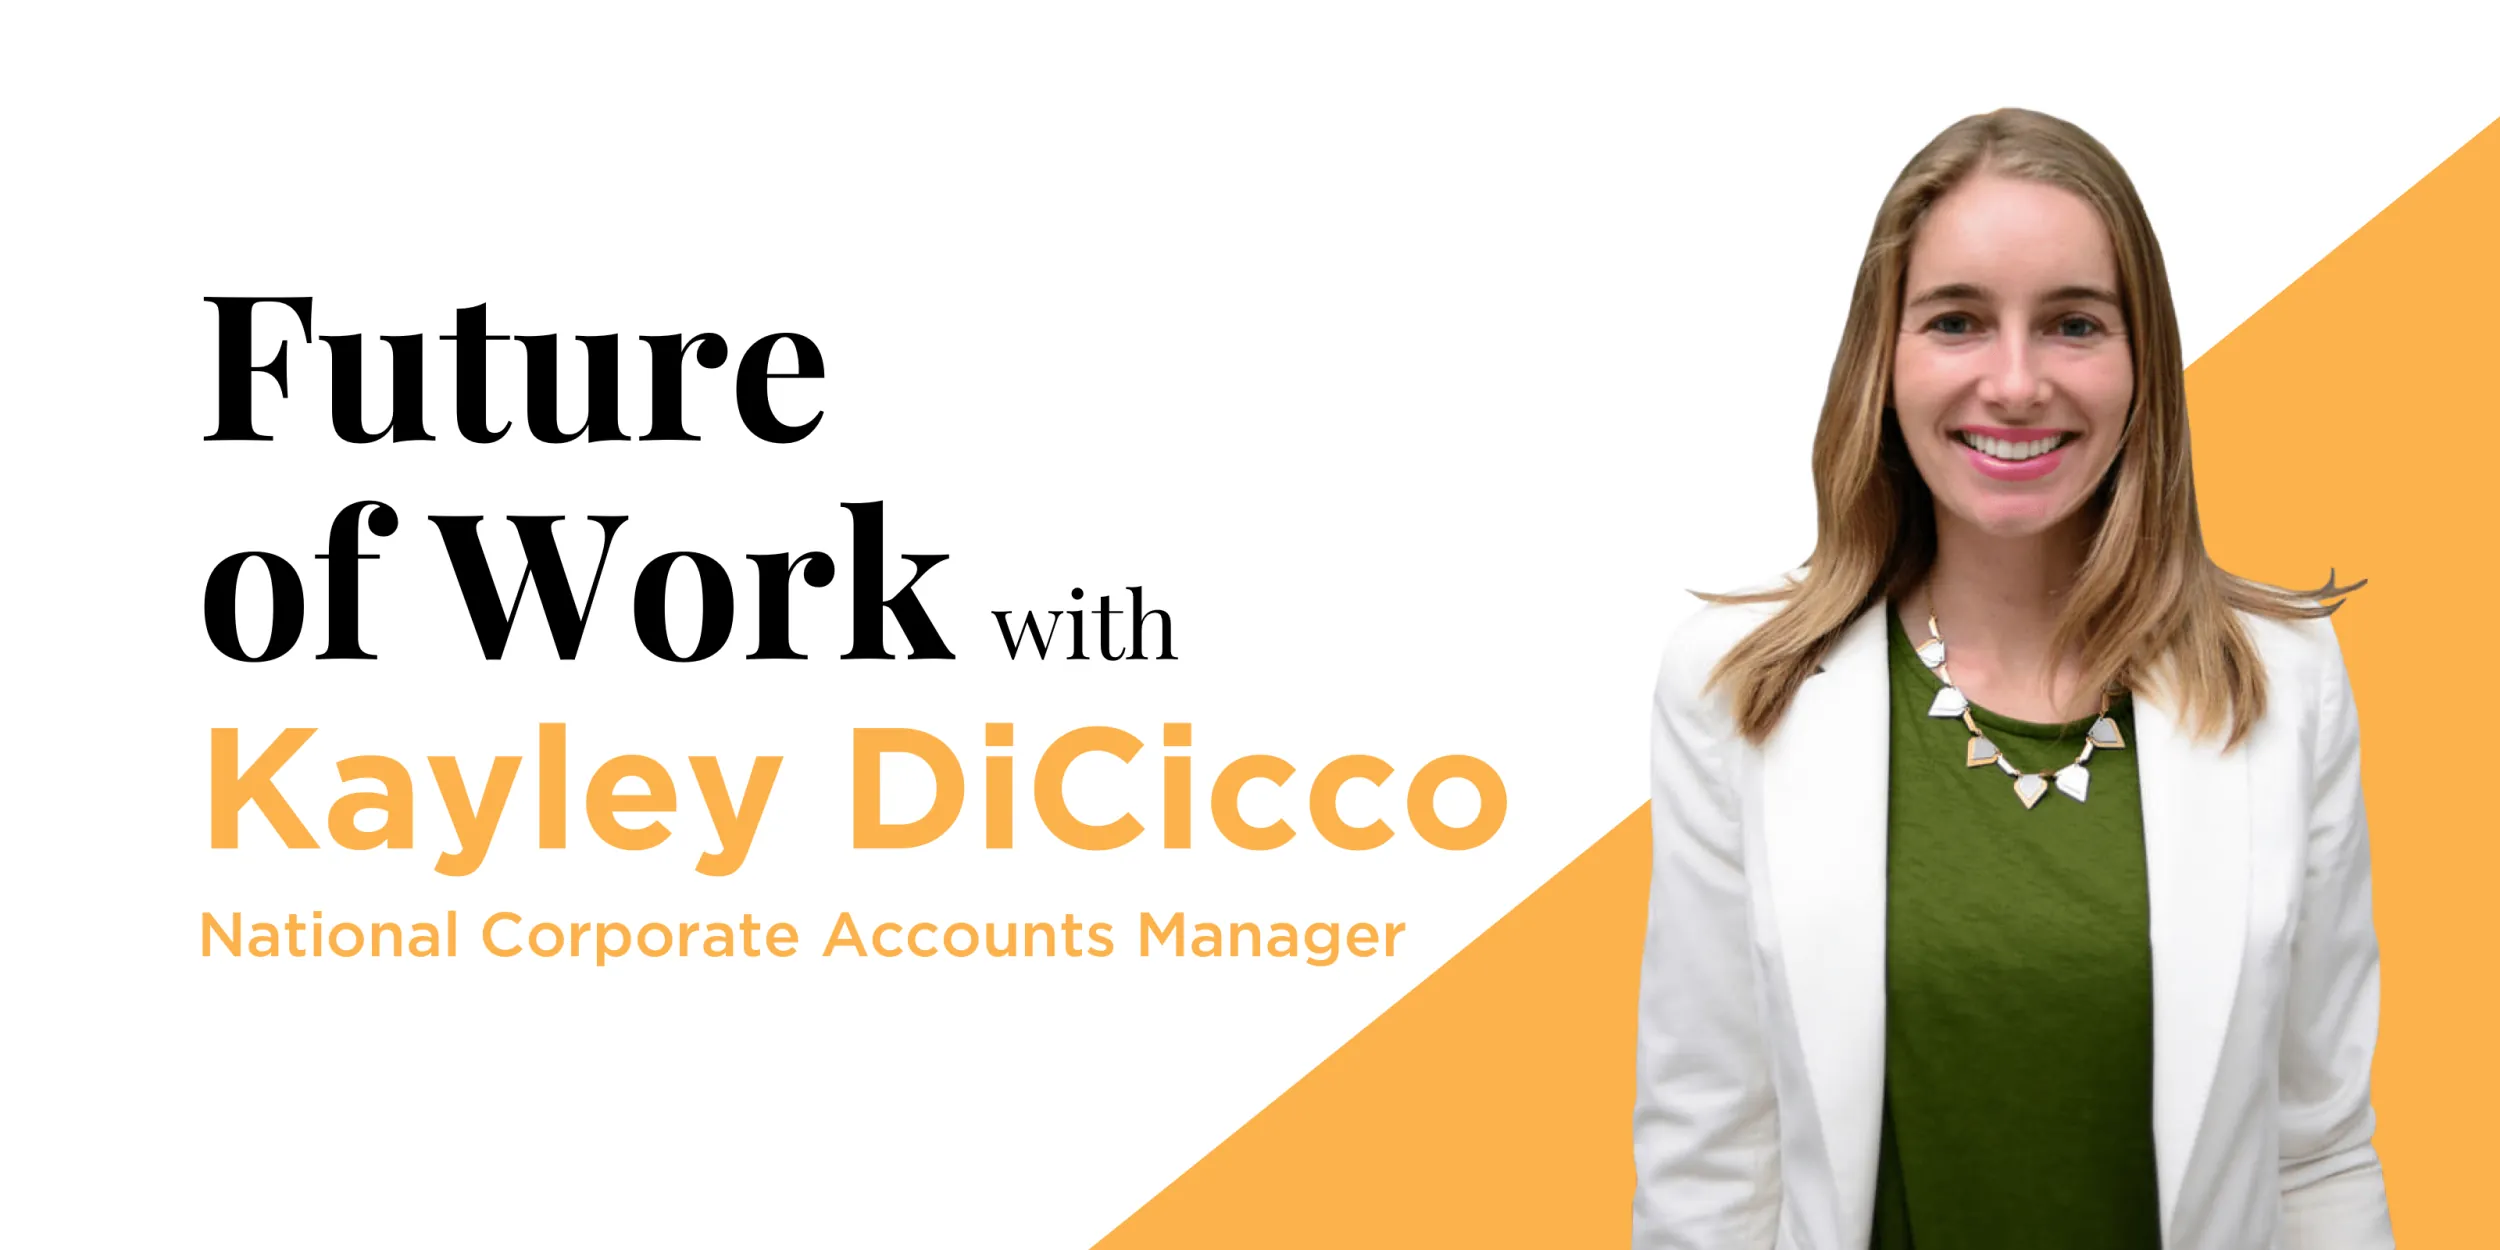 Future of Work with Kayley DiCicco